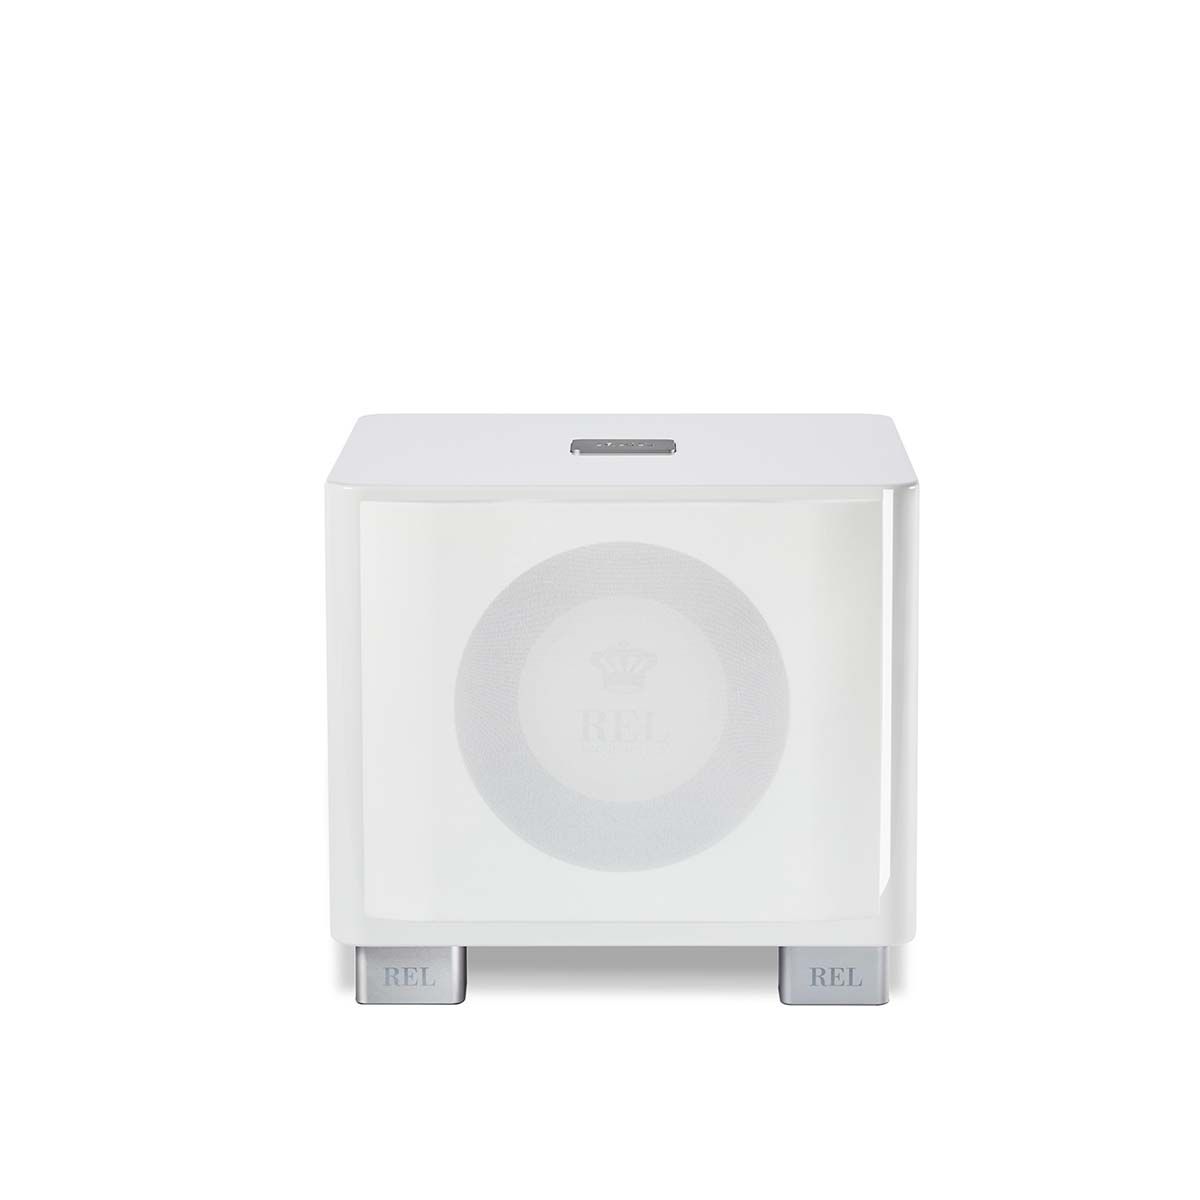 REL T/7x Subwoofer, white, front view with grille